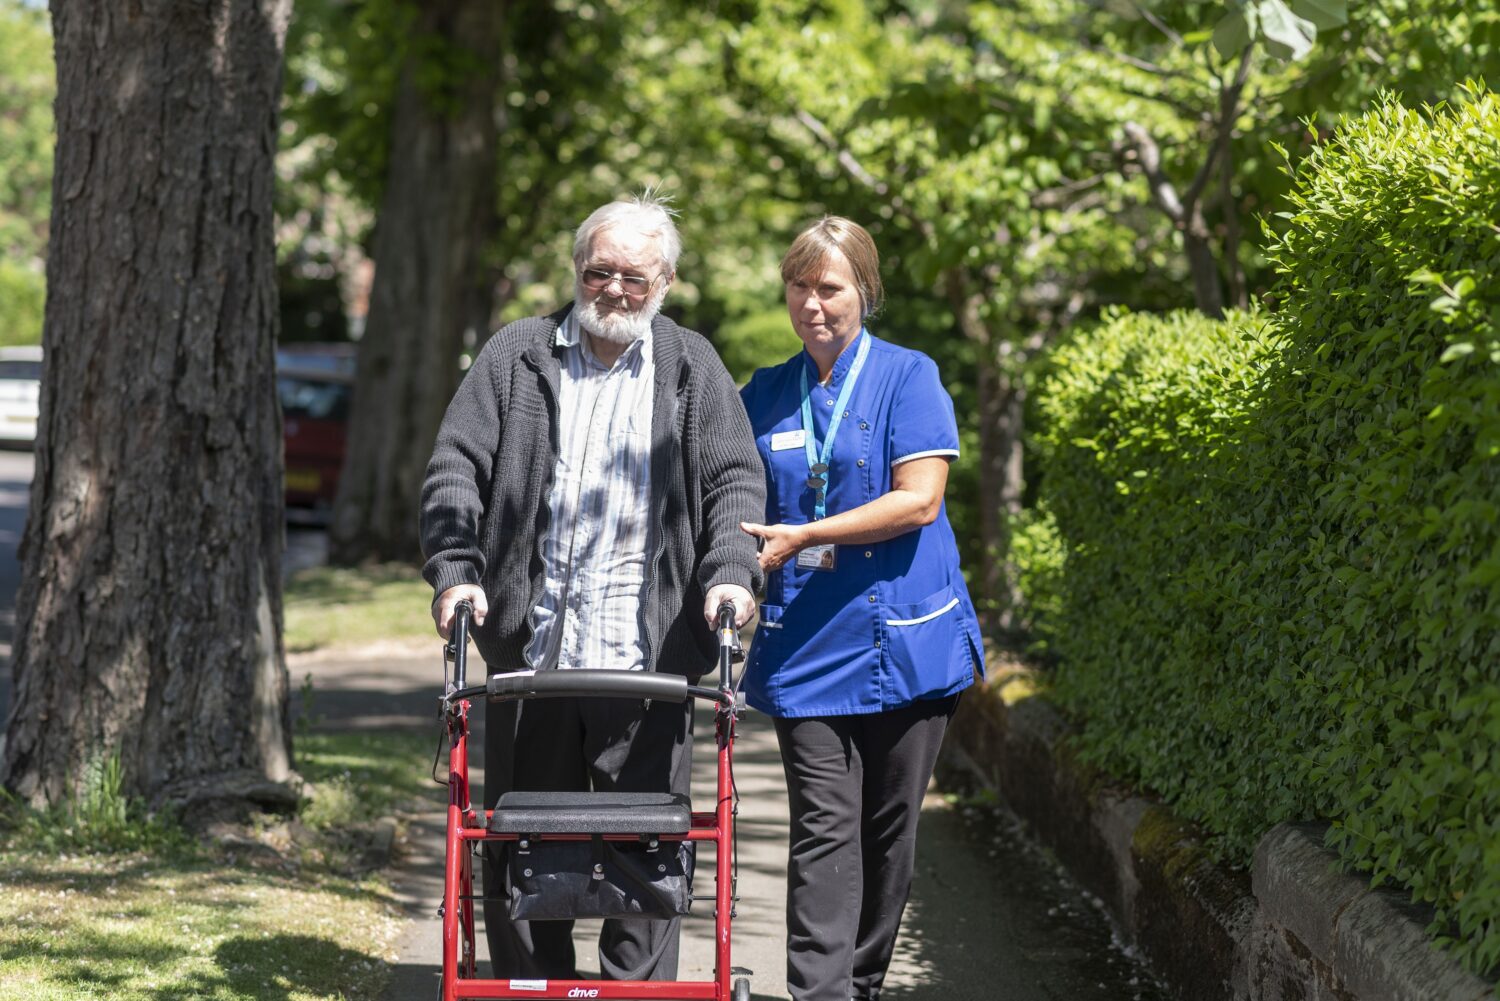 home care support lady helping elderly gentleman